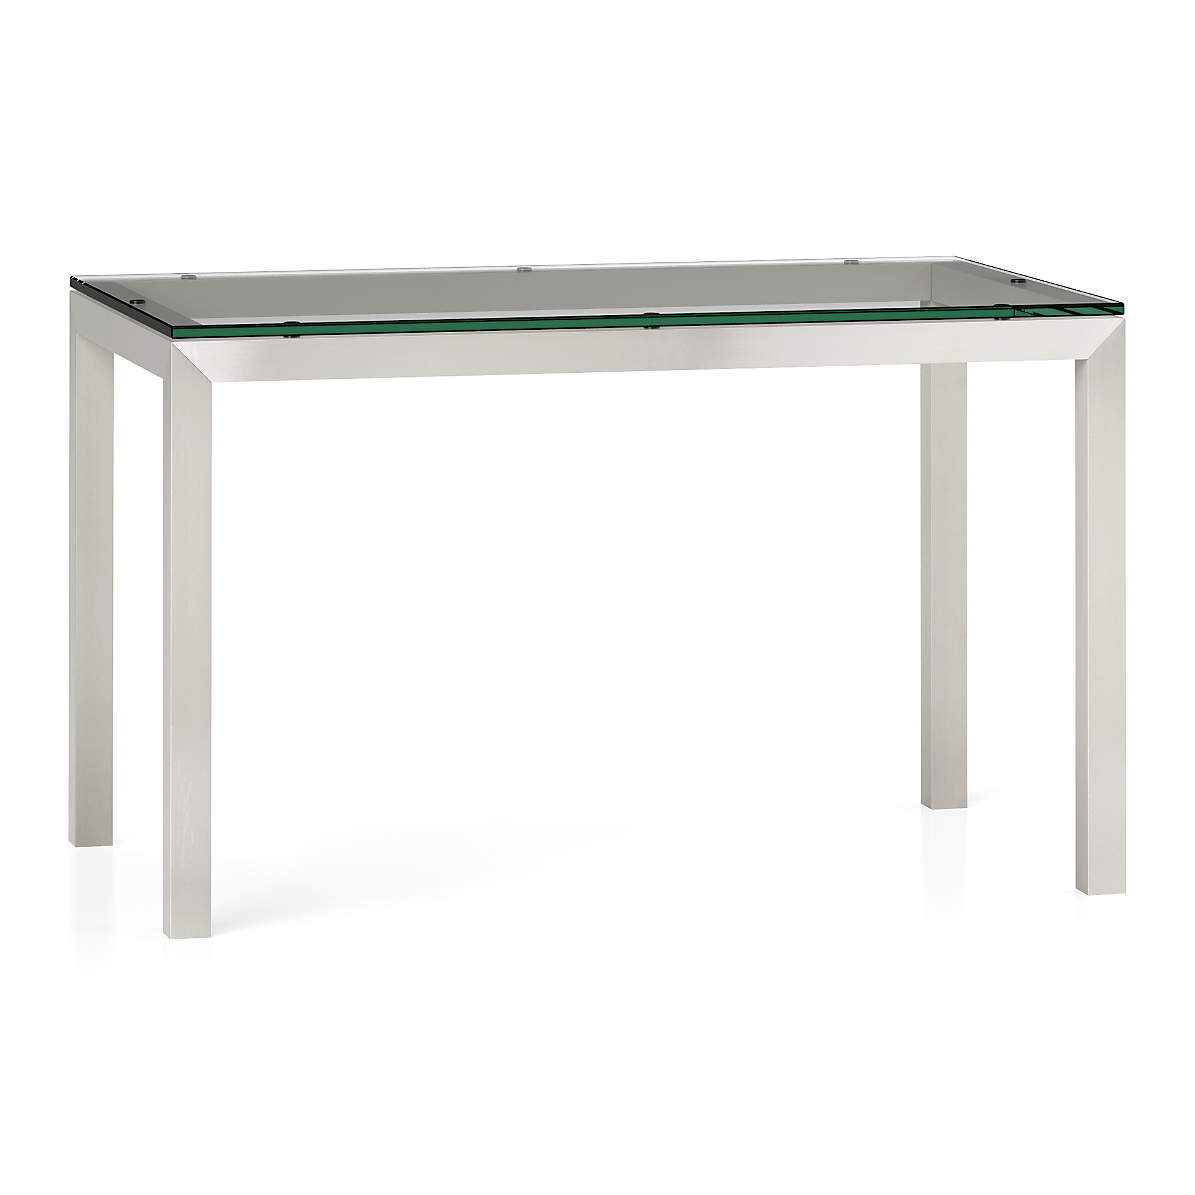 Stainless Steel Base 48x28 Dining Table, How Do You Get Scratches Out Of A Black Glass Table Top